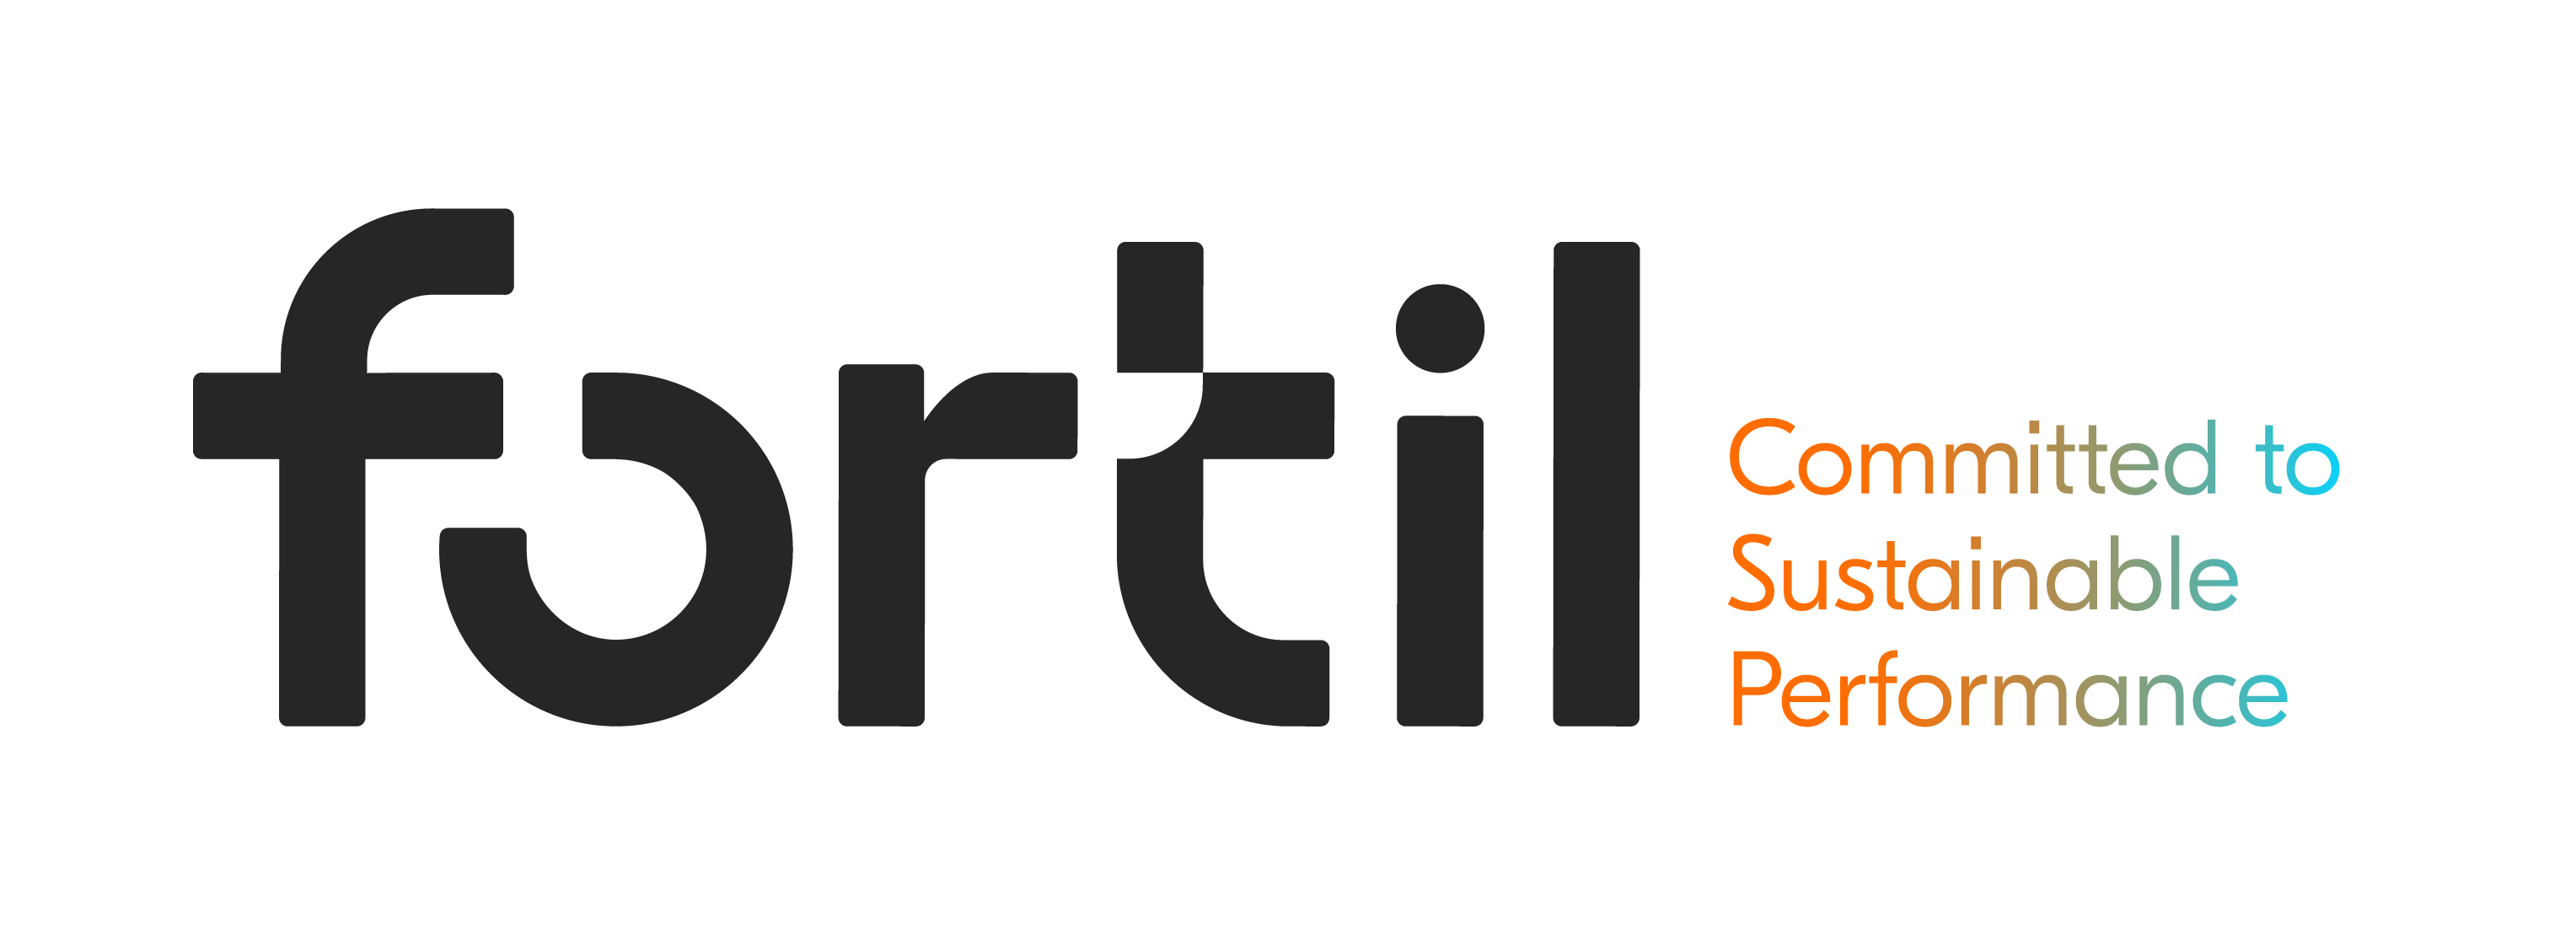 Fortil- committed to sustainable performance